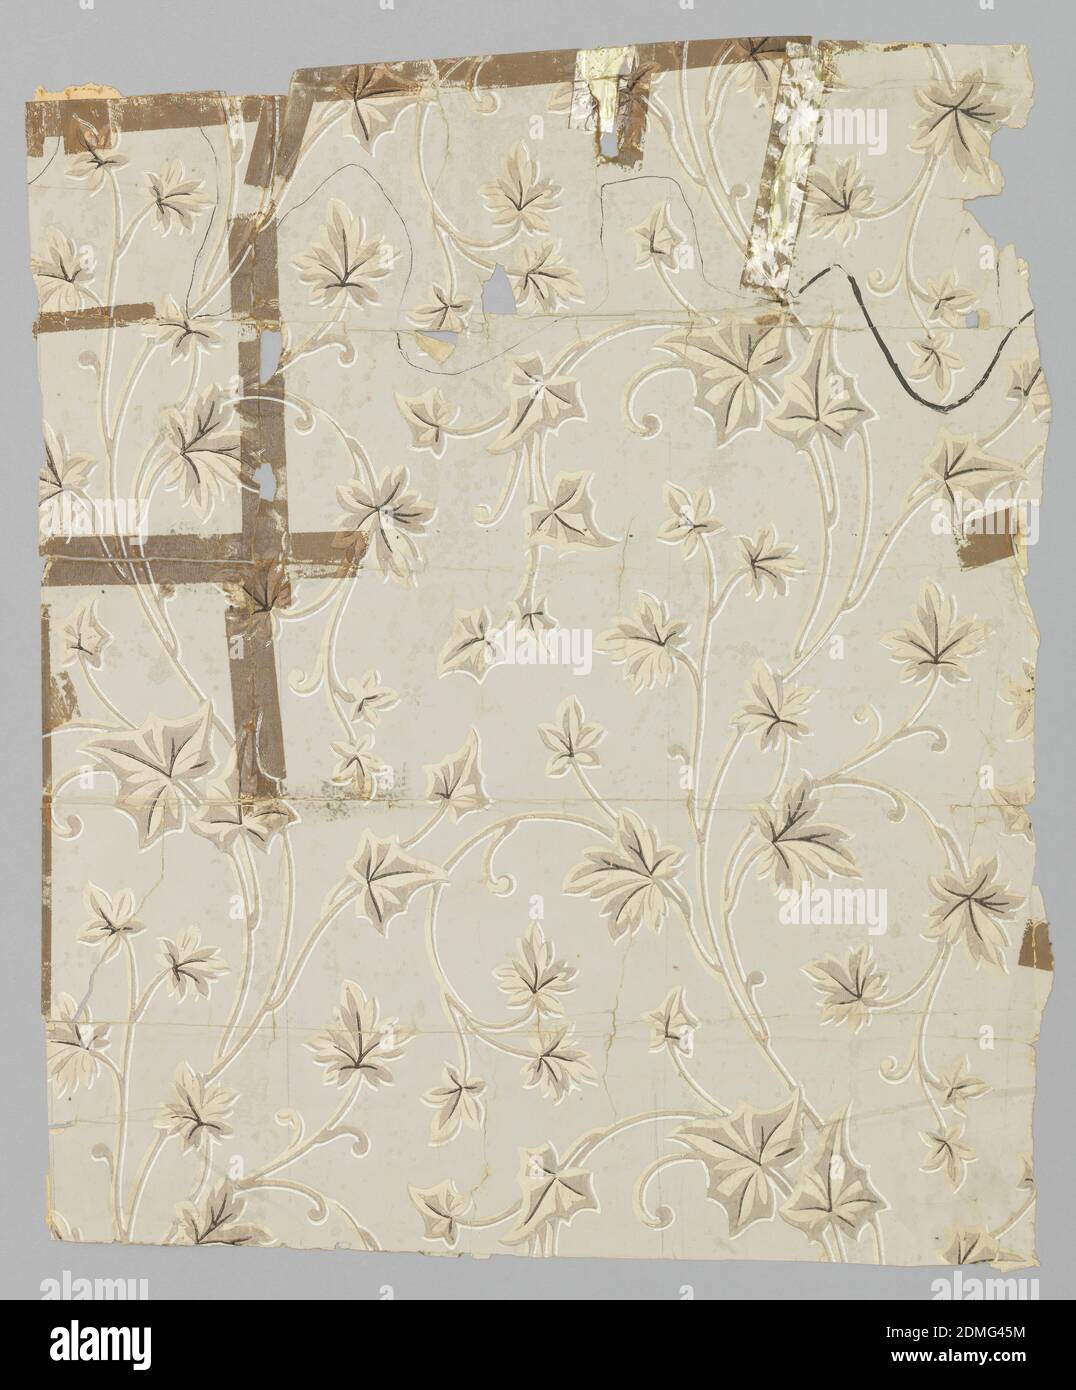 Sidewall, Block-printed on satin ground, Scrolling ivy design. Printed in gray, black and white on tan satin ground. Original documents for 'Climbing Ivy'., USA, 1850–70, Wallcoverings, Sidewall Stock Photo